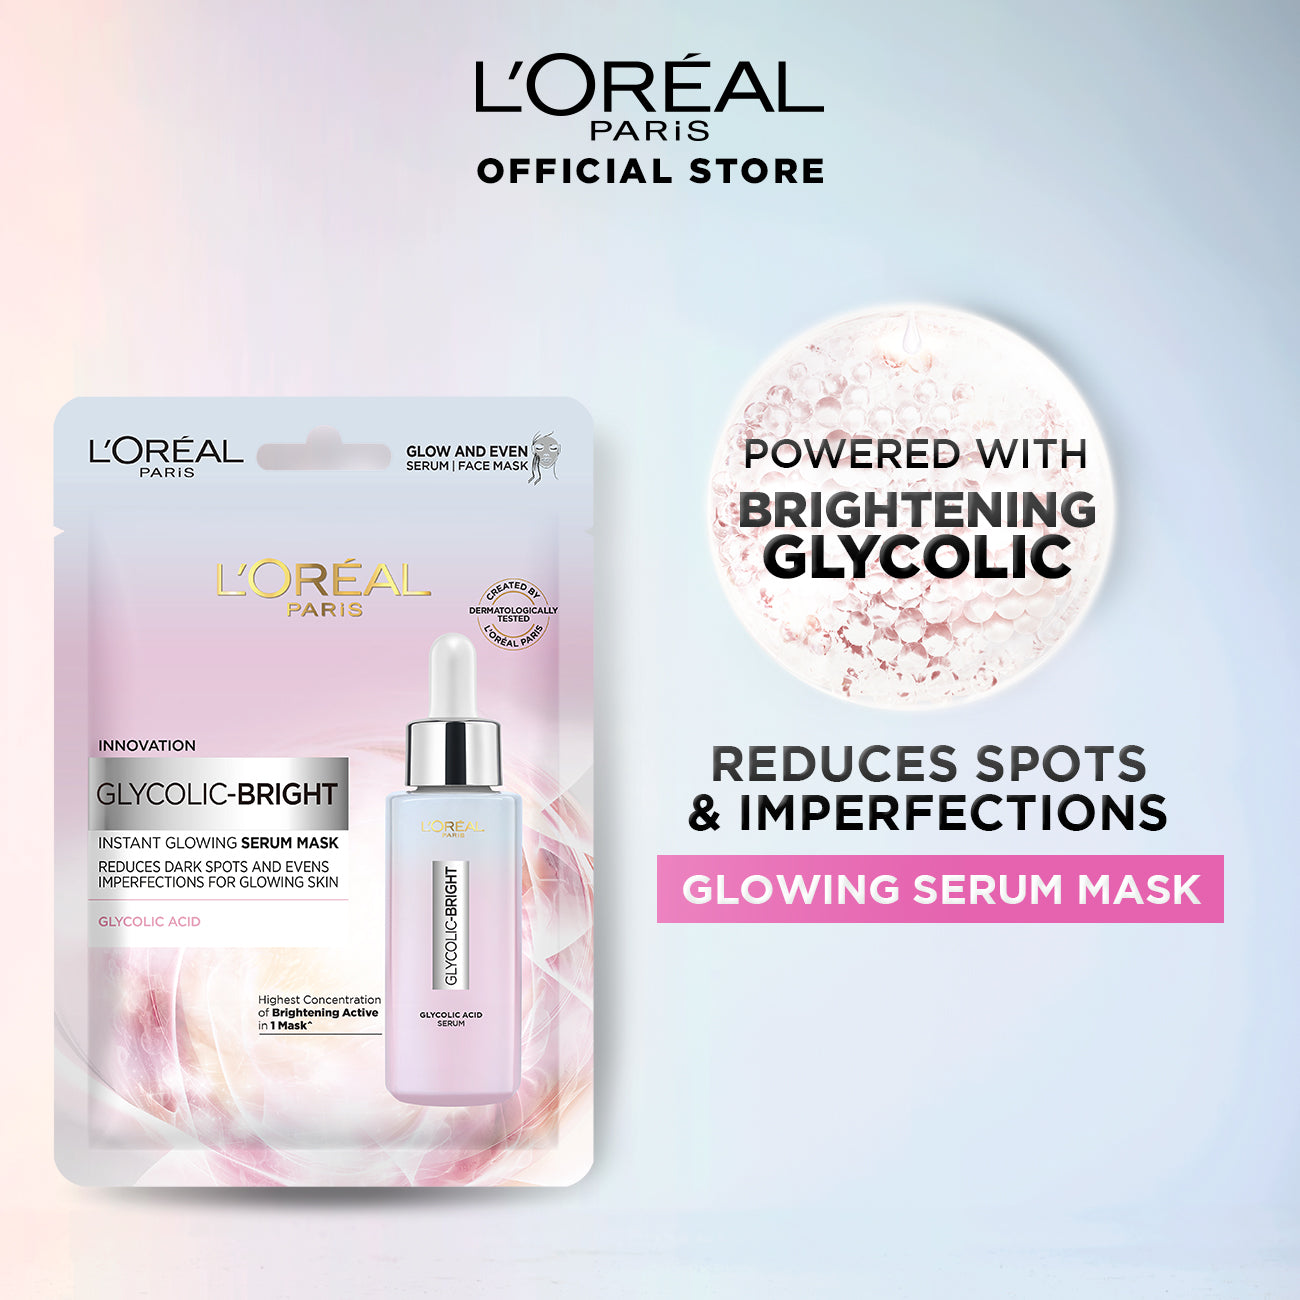 Glycolic Bright Instant Glowing Serum Mask - L'Oreal Paris